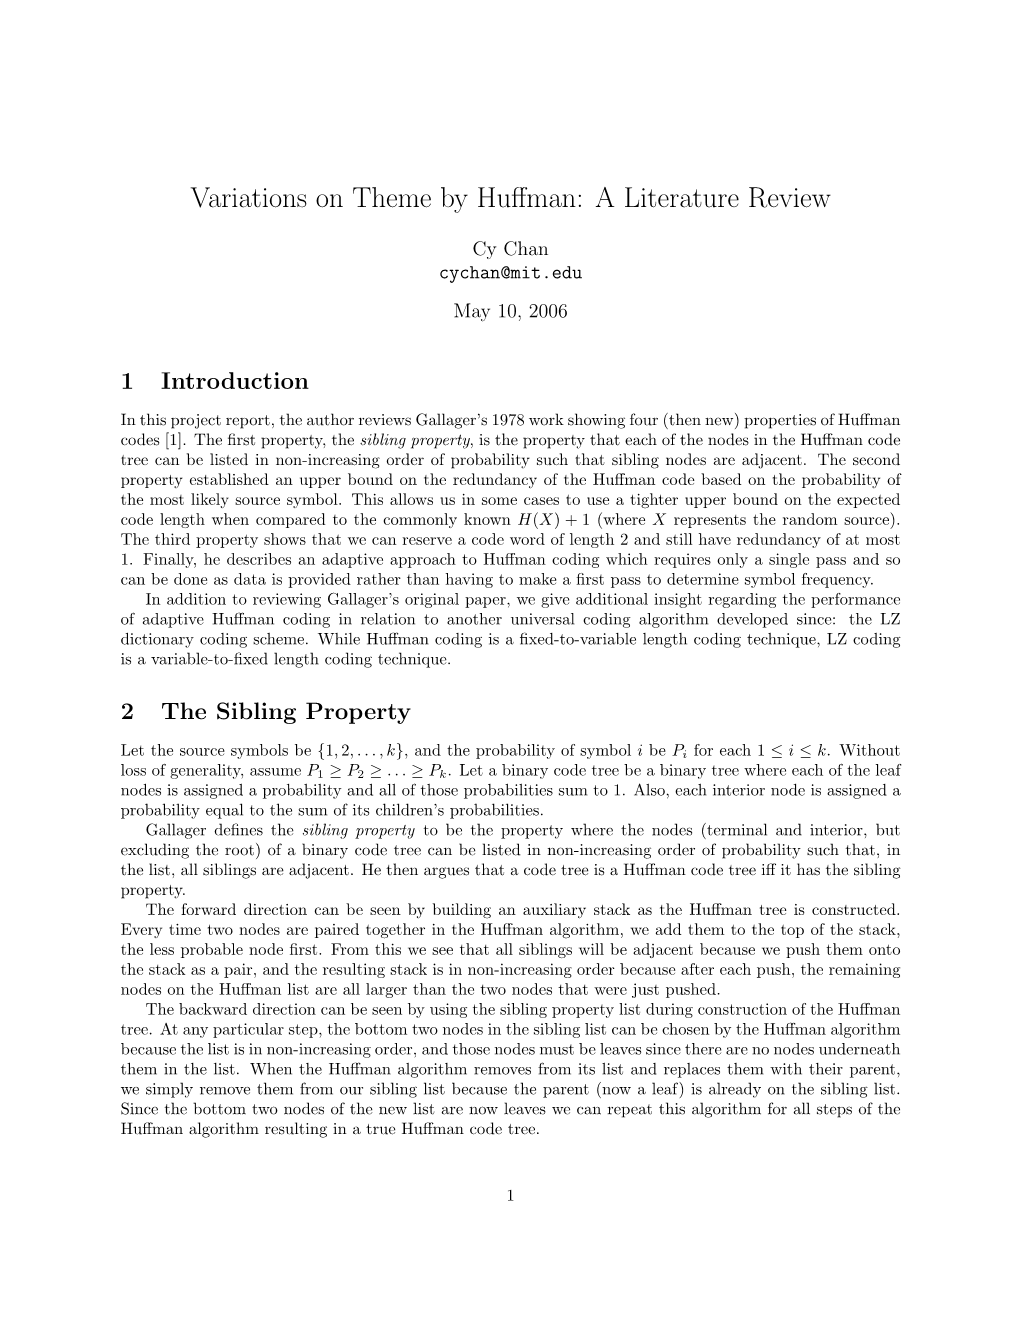 Variations on Theme by Huffman: a Literature Review